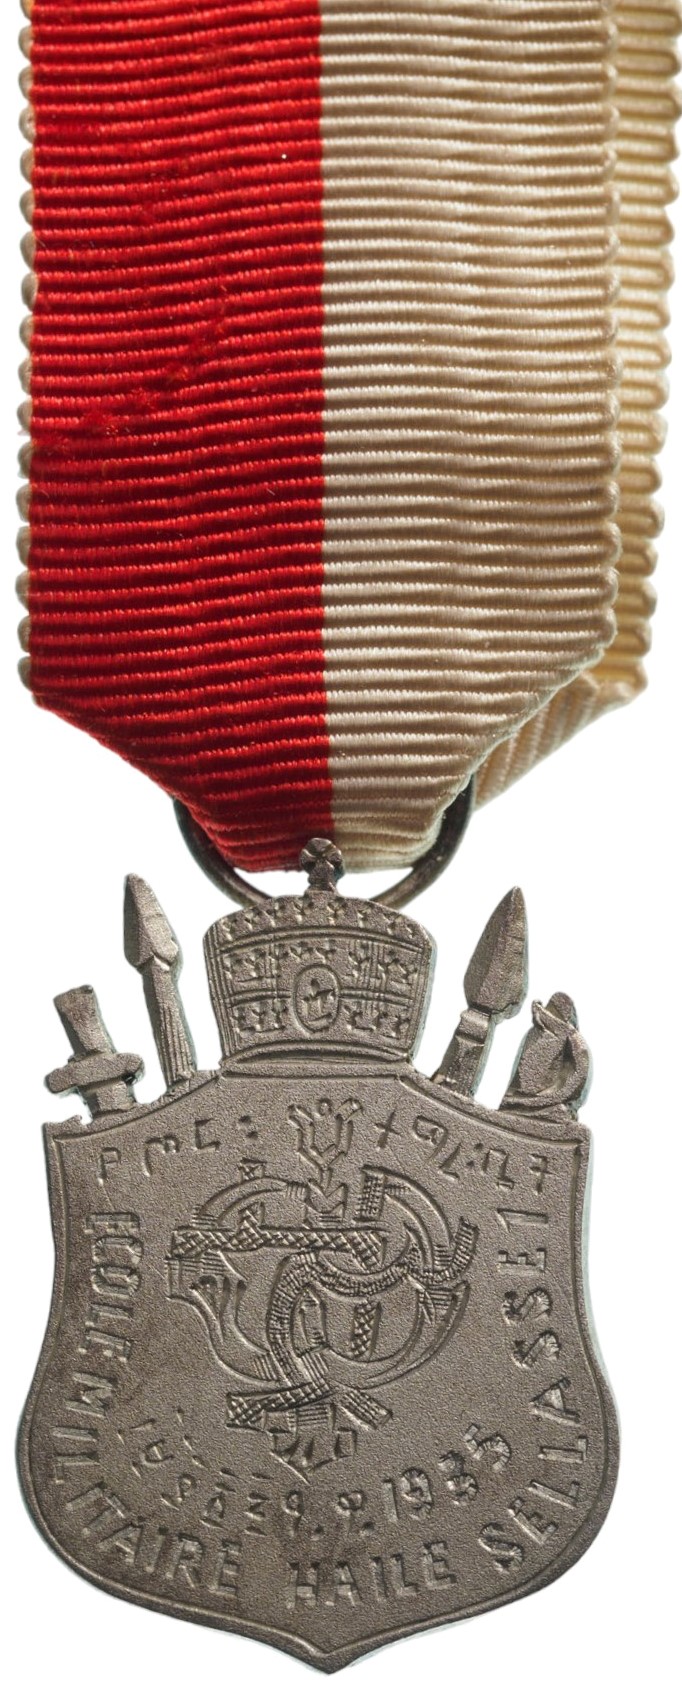 Haile Selassie I Military College Jubilee Medal, instituted in 1960.